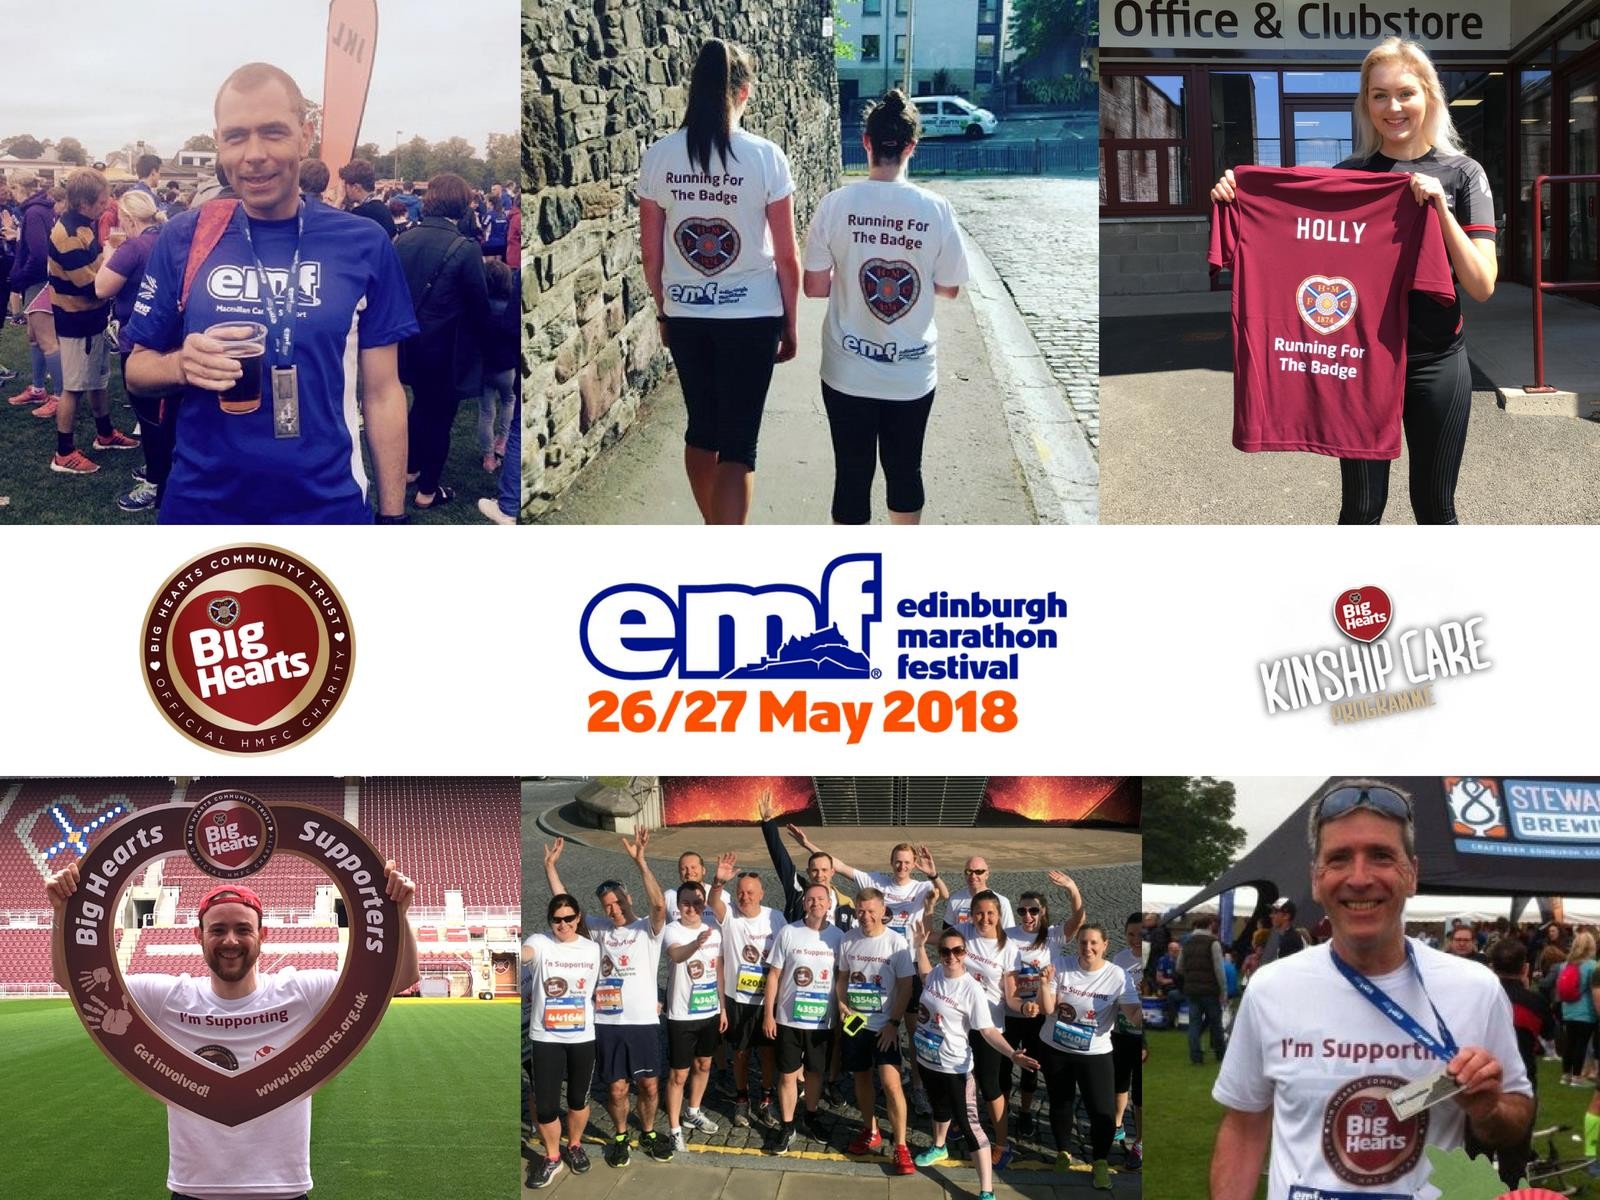  » EMF 2018 – Running 480 kms in aid of Kinship Care families